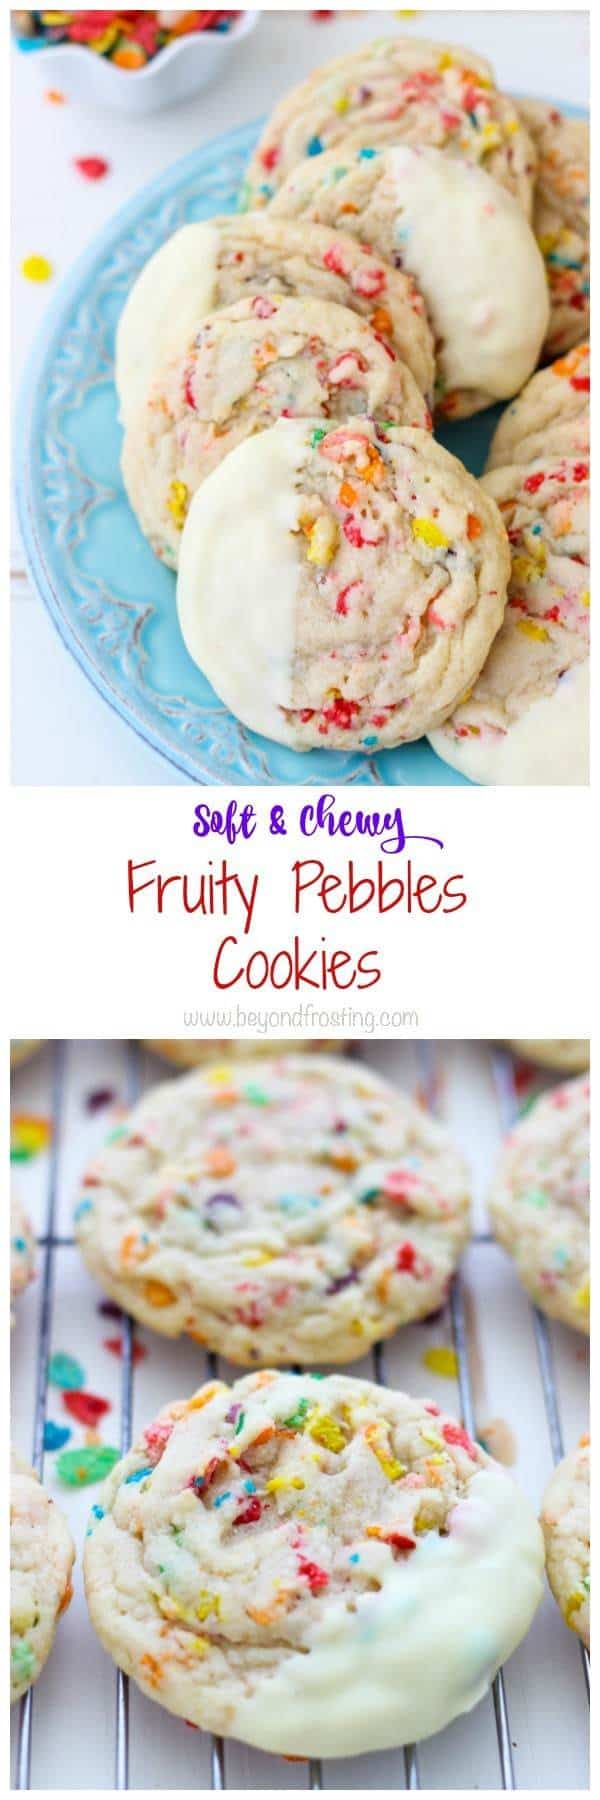 These super fun Fruity Pebbles Cookies are a soft-baked sugar cookie stuffed with fruity pebbles and dipped in white chocolate.